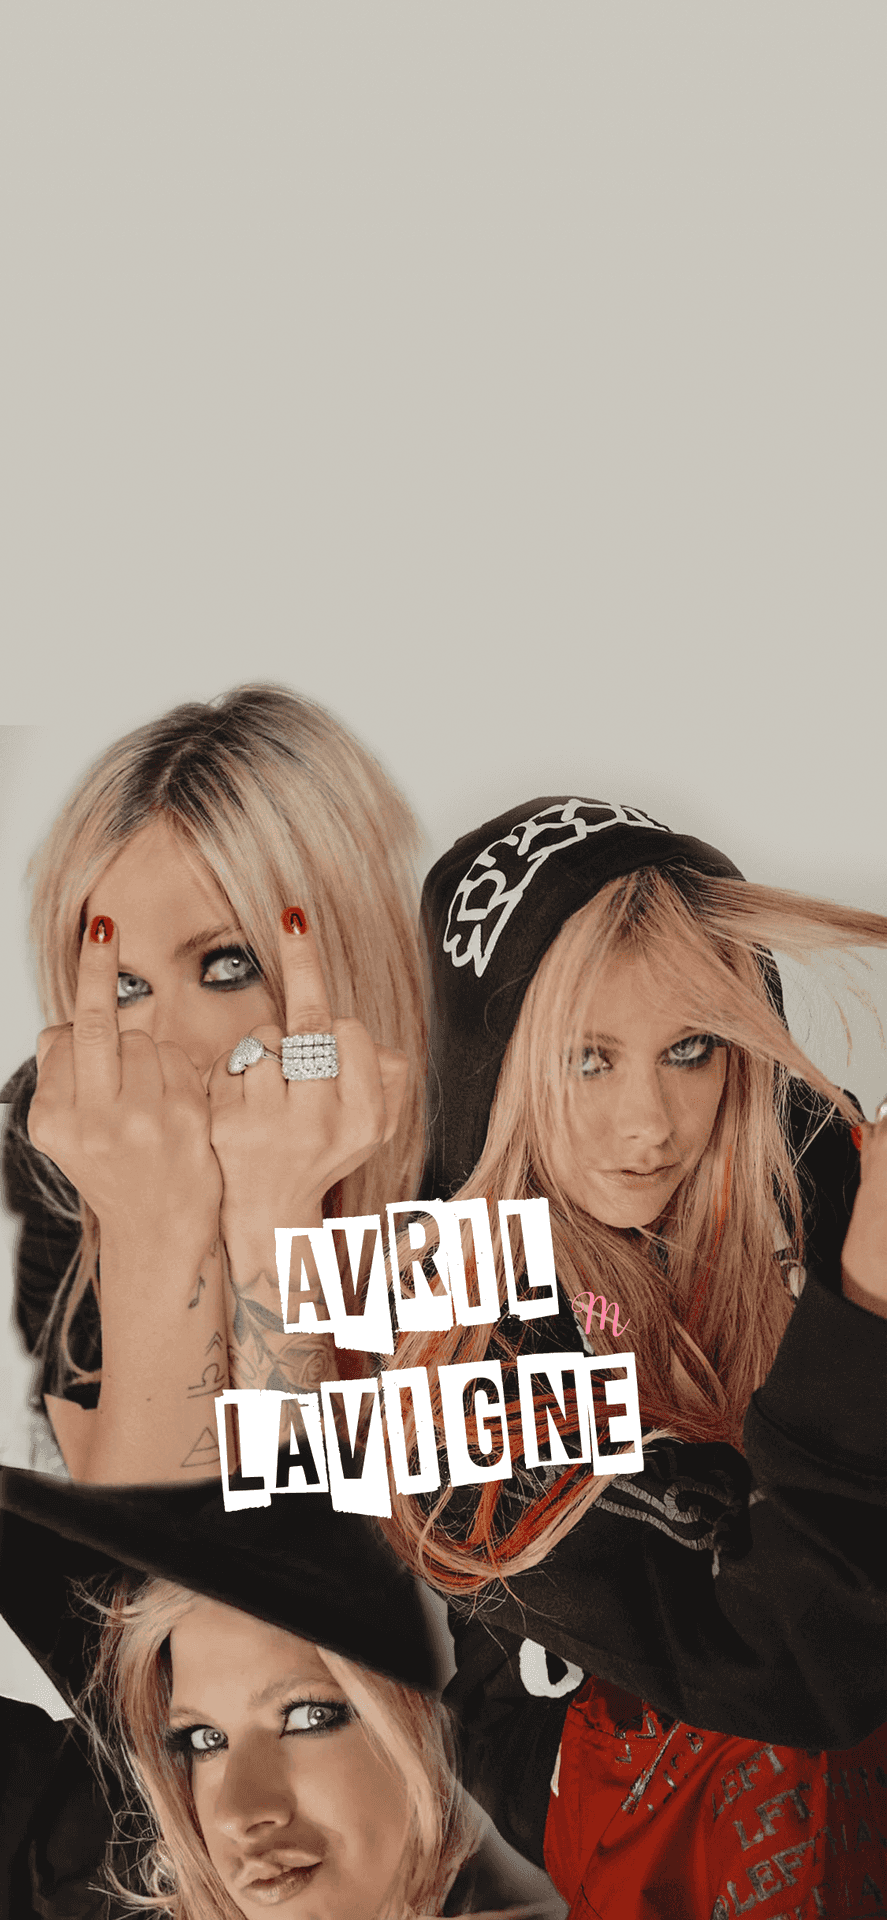 Avril Lavigne is the Artist who Paved the Way for a New Generation of Pop Punk